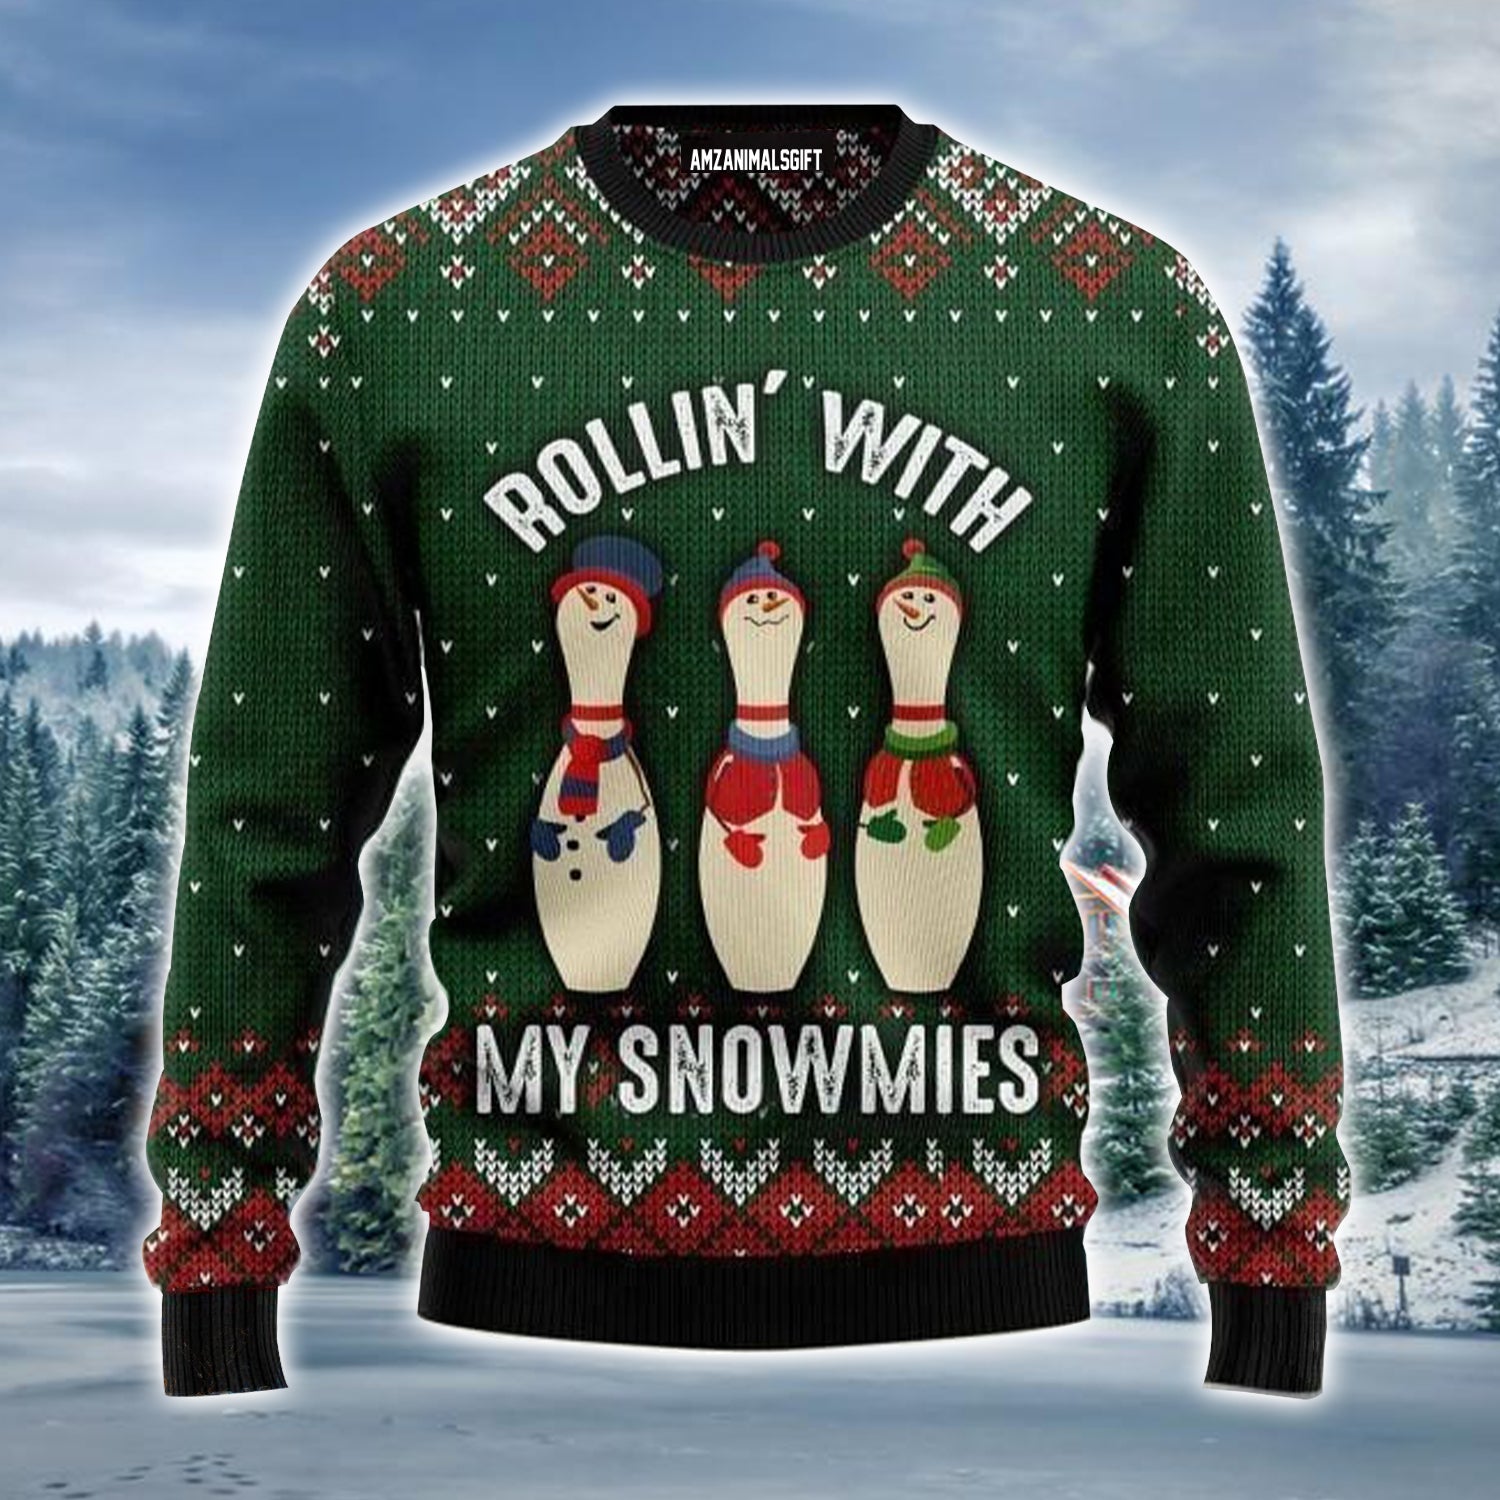 Bowling Rollin' With My Snowmies Ugly Christmas Sweater, Christmas Ugly Sweater For Men & Women - Gift For Christmas, Bowling Lovers, Bowling Players